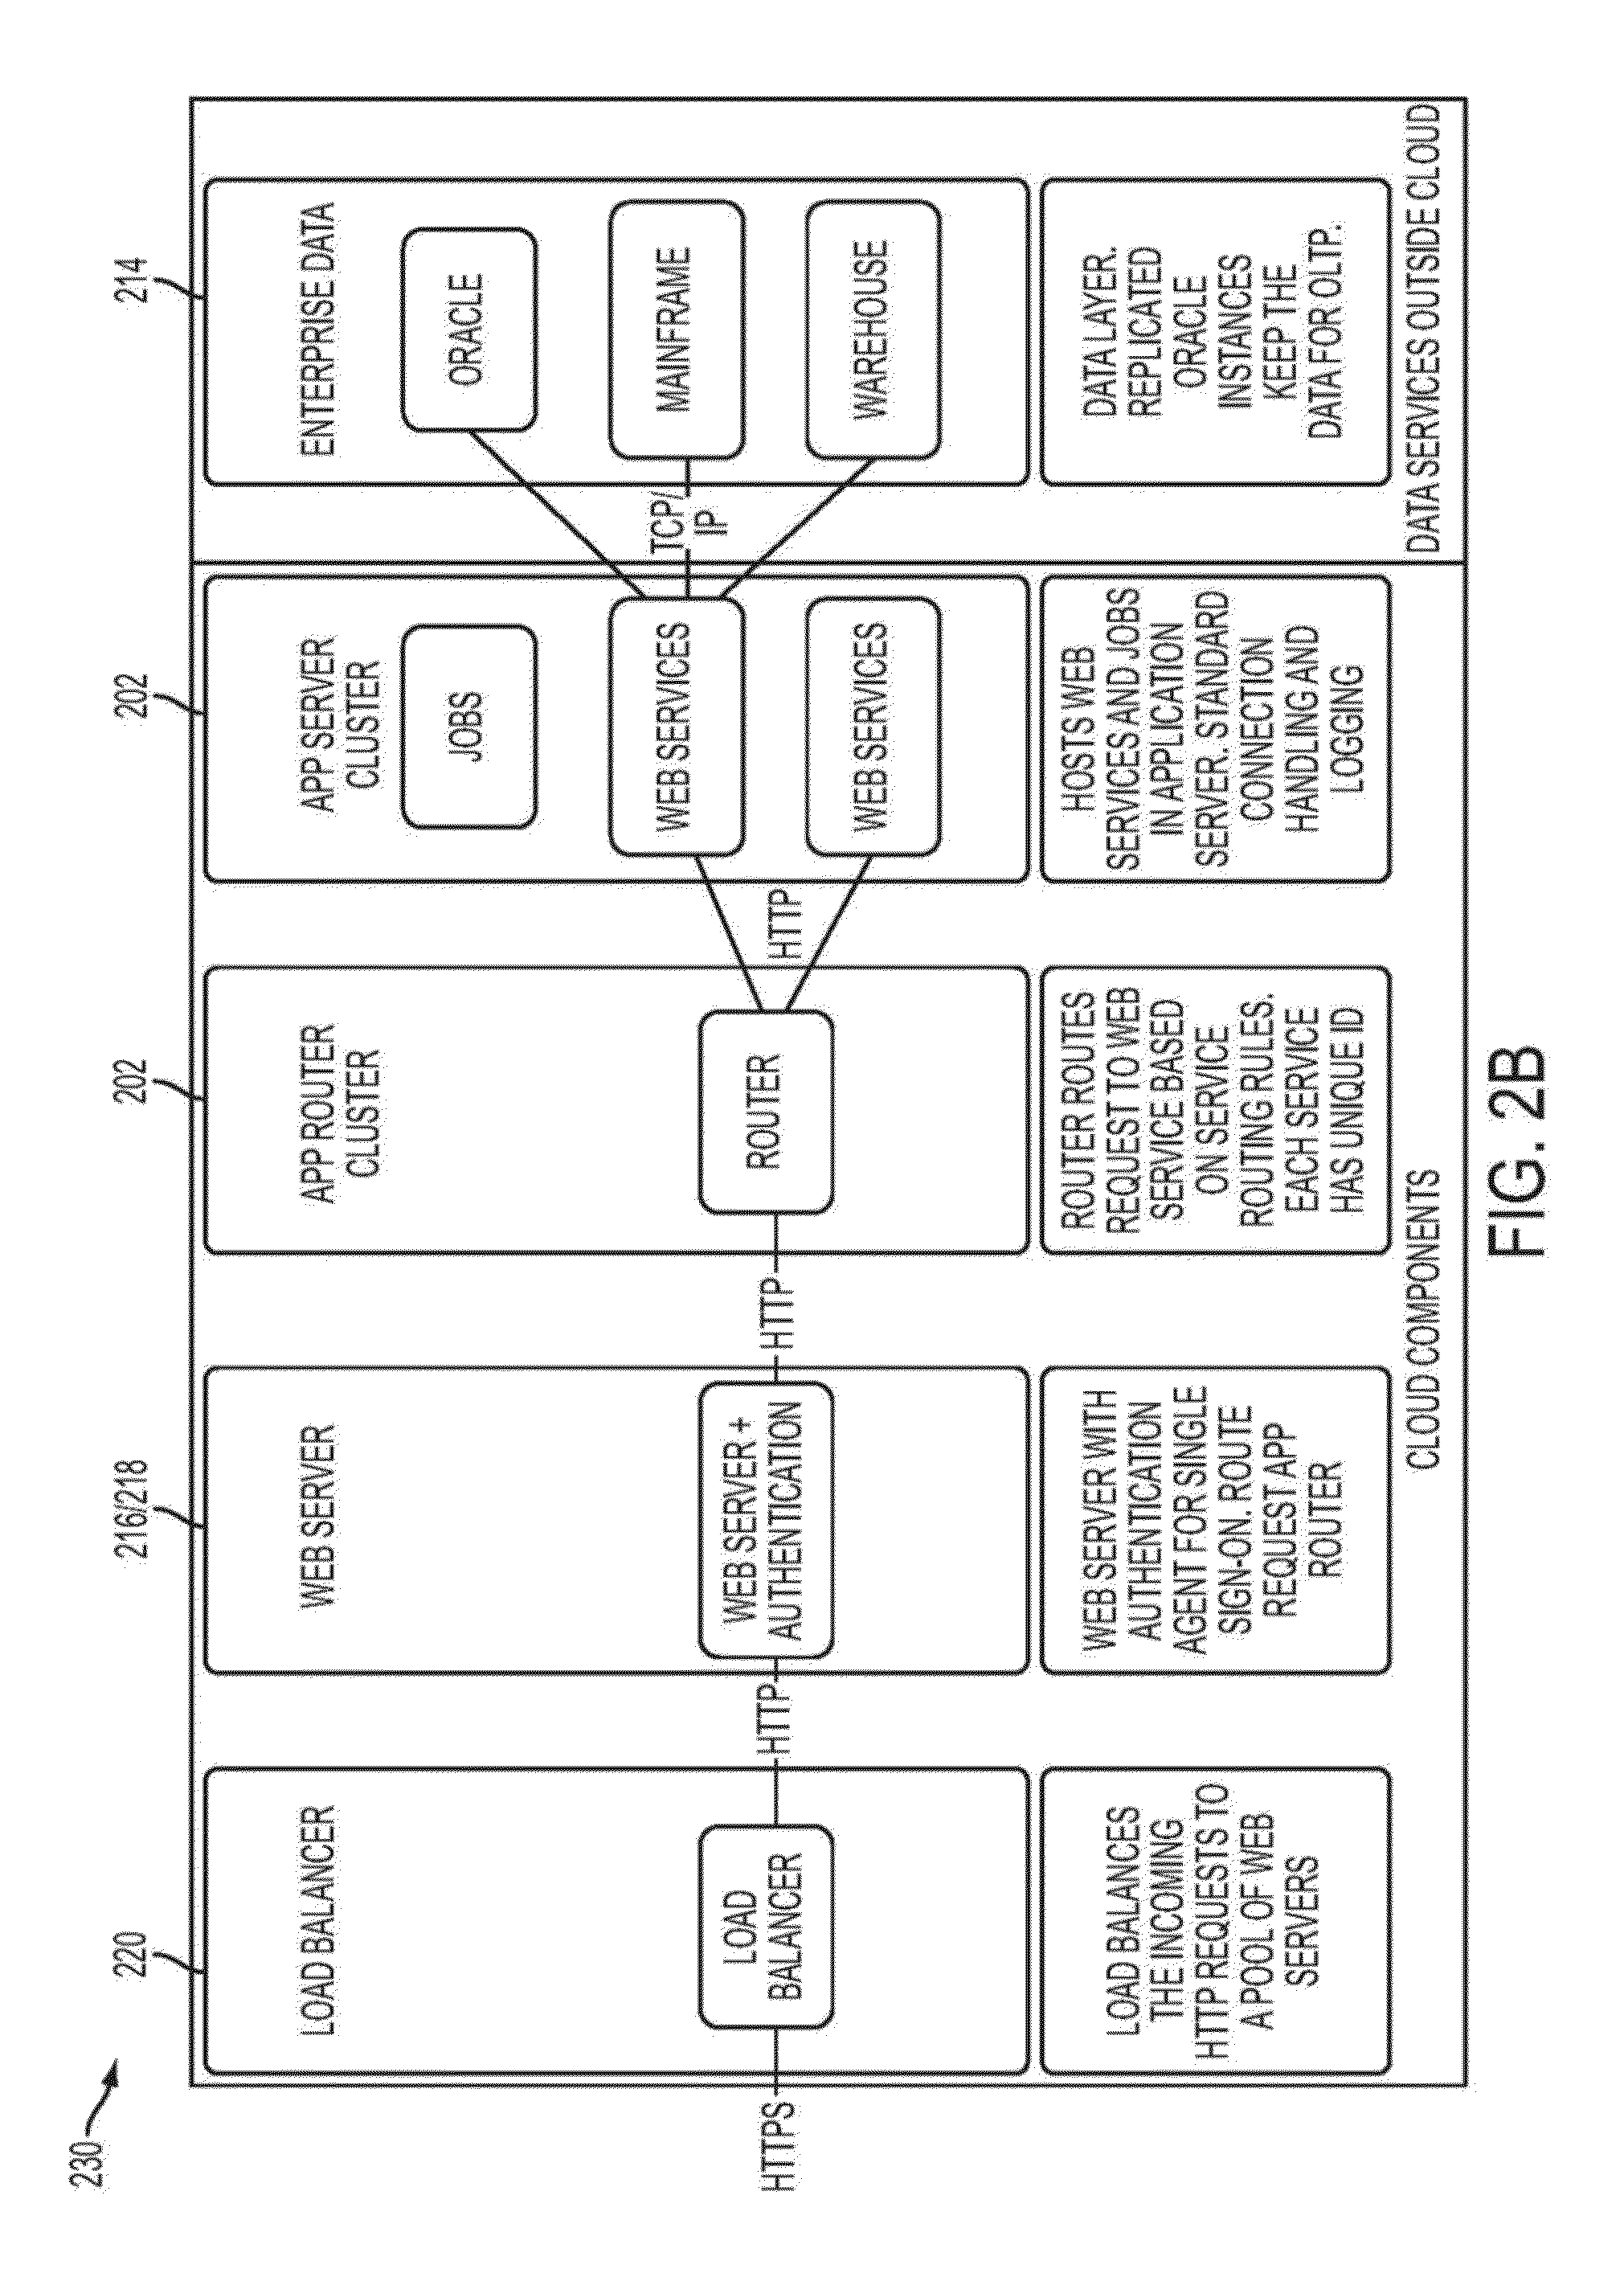 Systems and Methods for Data Warehousing in Private Cloud Environment